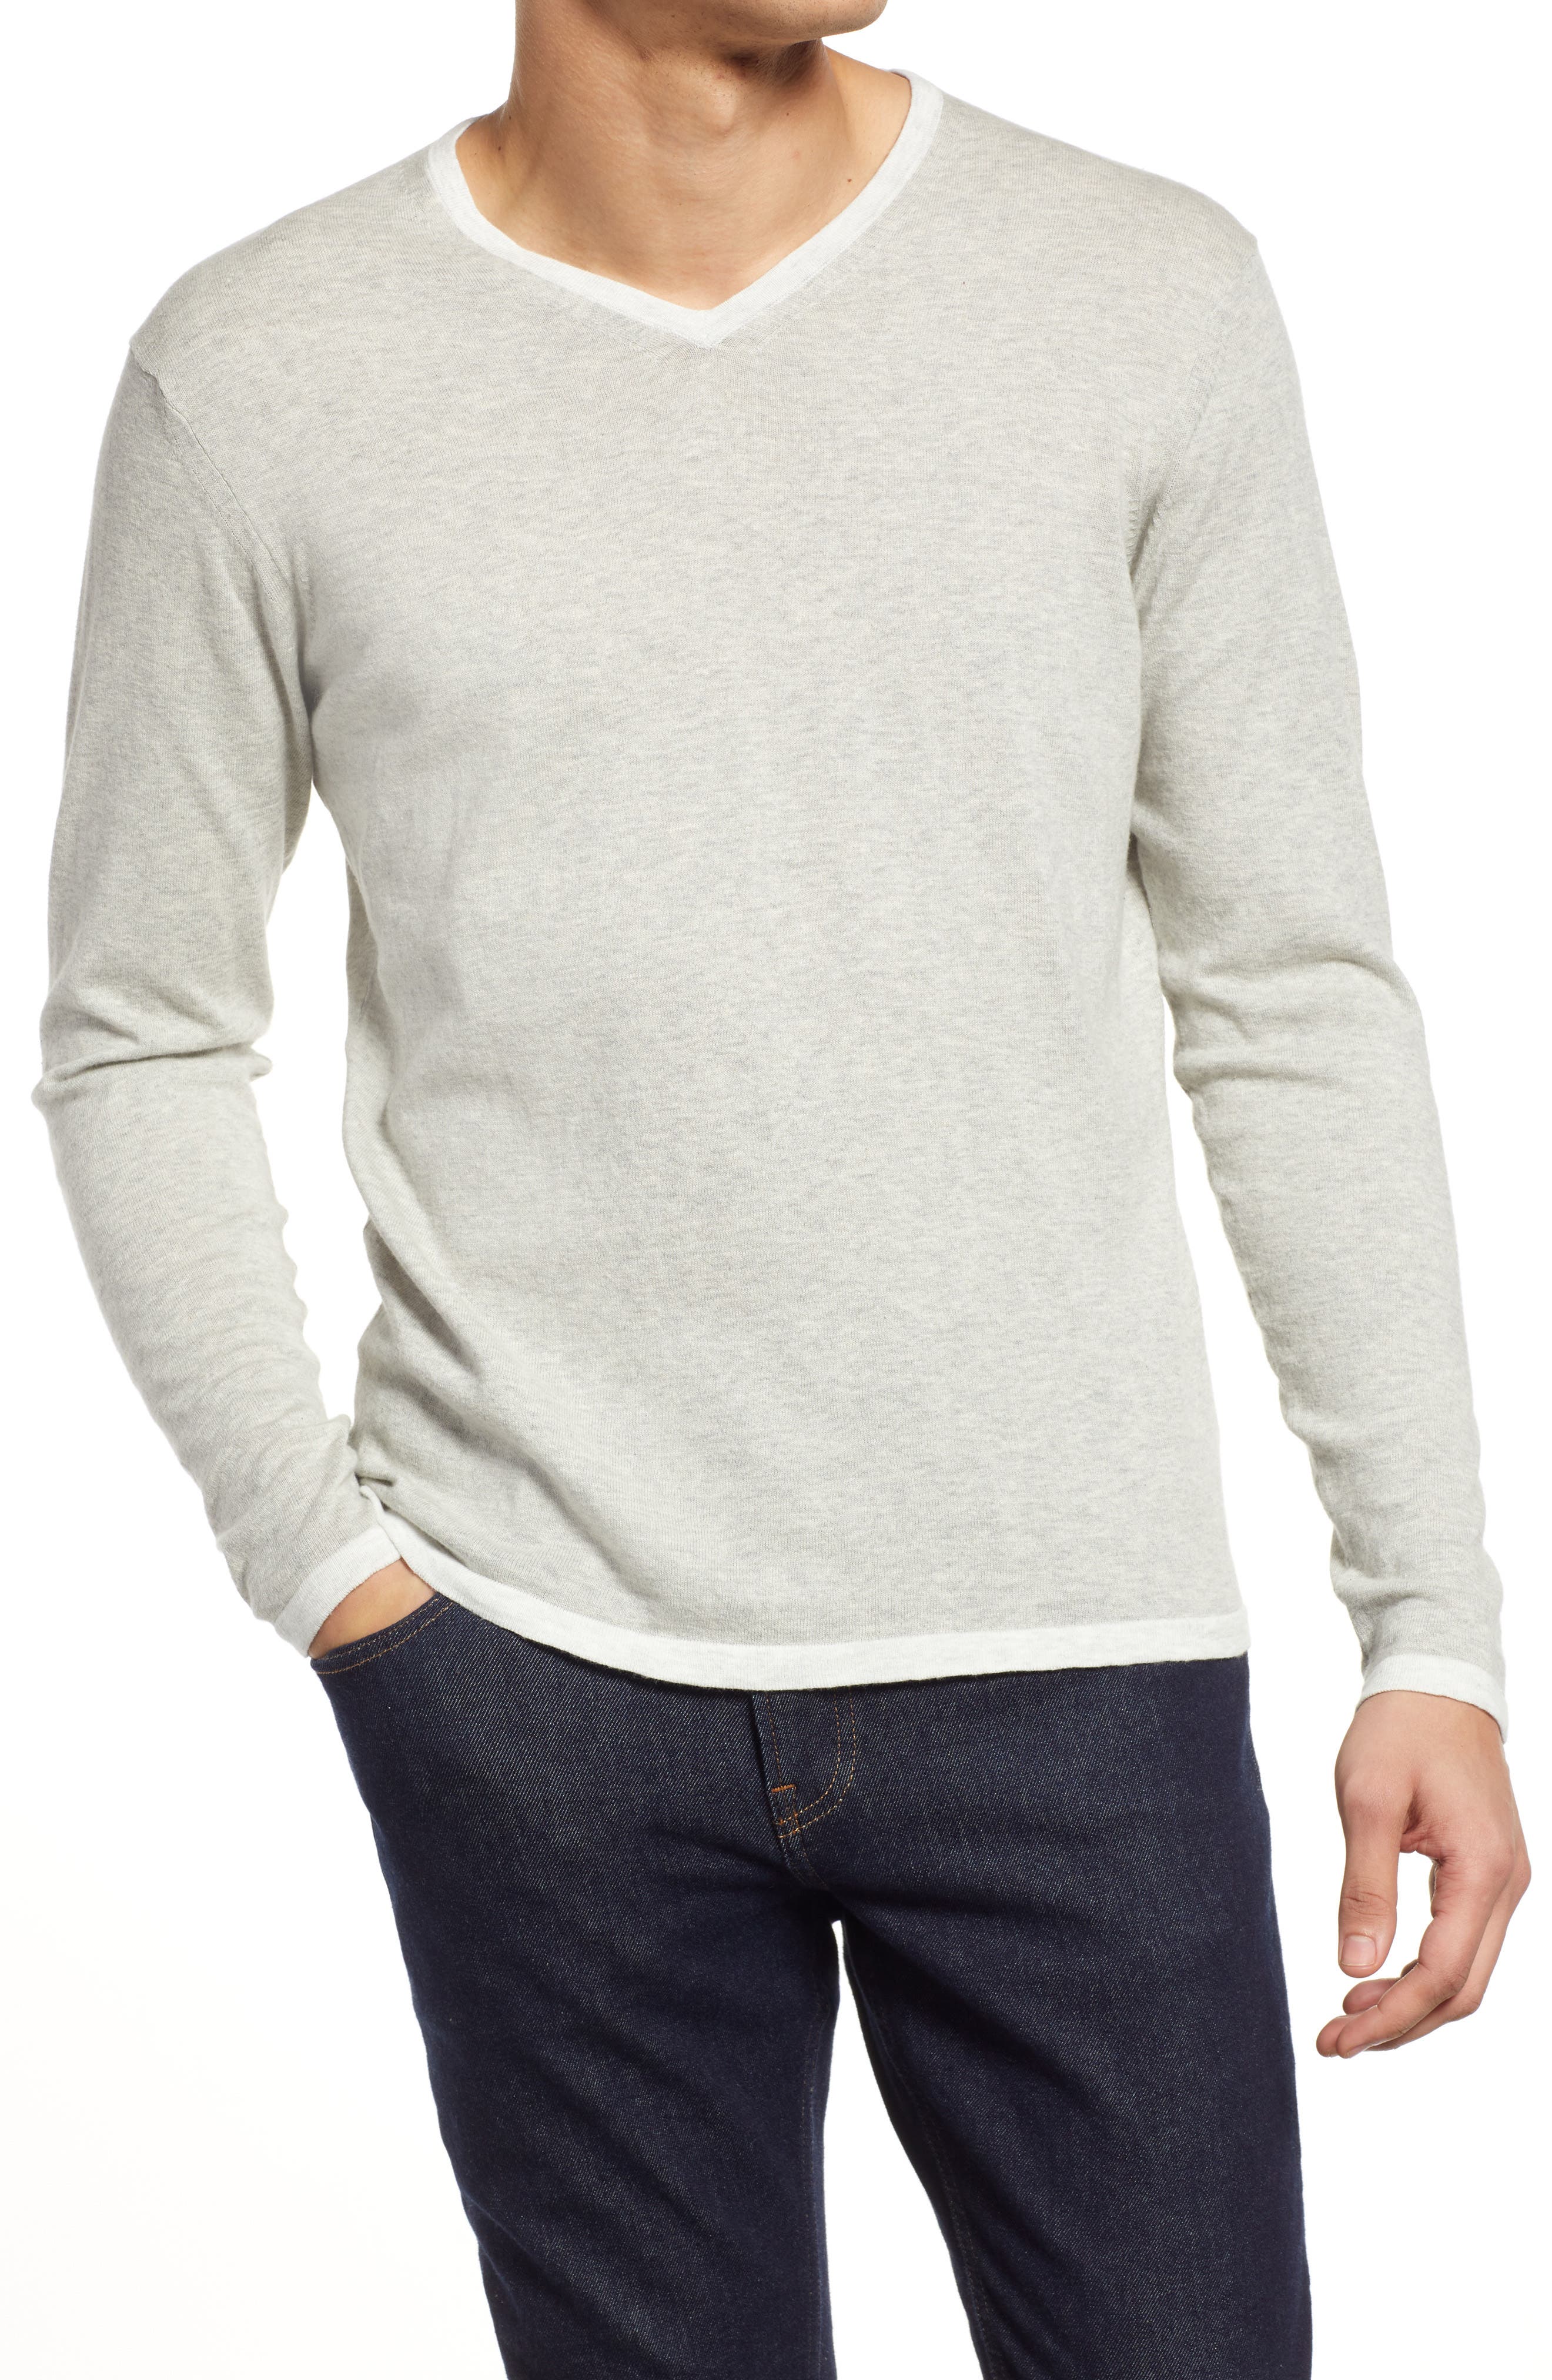 Mens Striped V Neck Jumpers Pullover Long Sleeve Knitwear Formal Business Office Casual Basic Sweater TENDY Soft Elegant Knitted Comfy FINE Knit TOP Big Size S-5XL